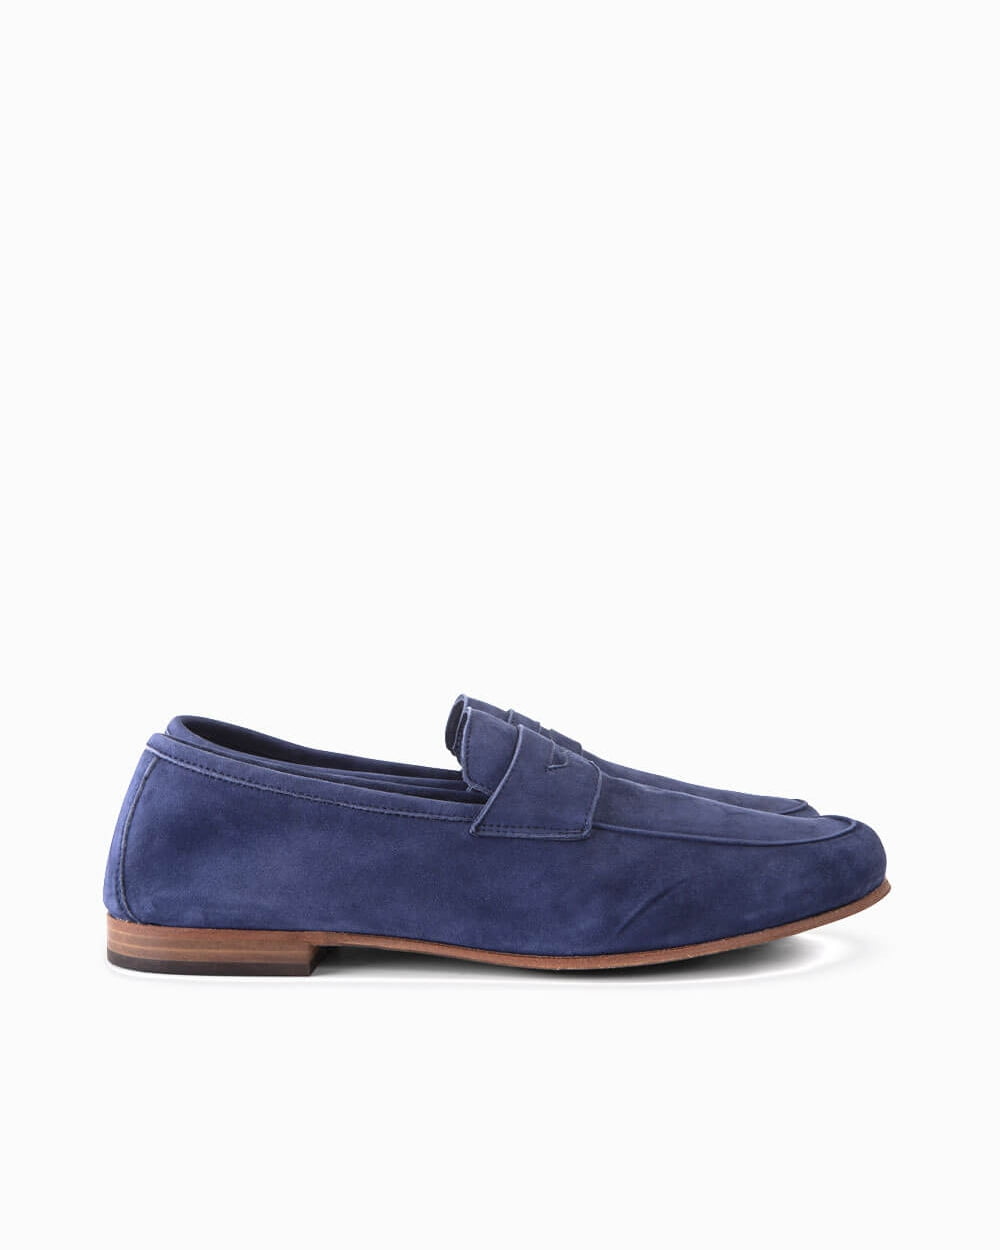 Suede loafers for - Andrea Ventura Firenze